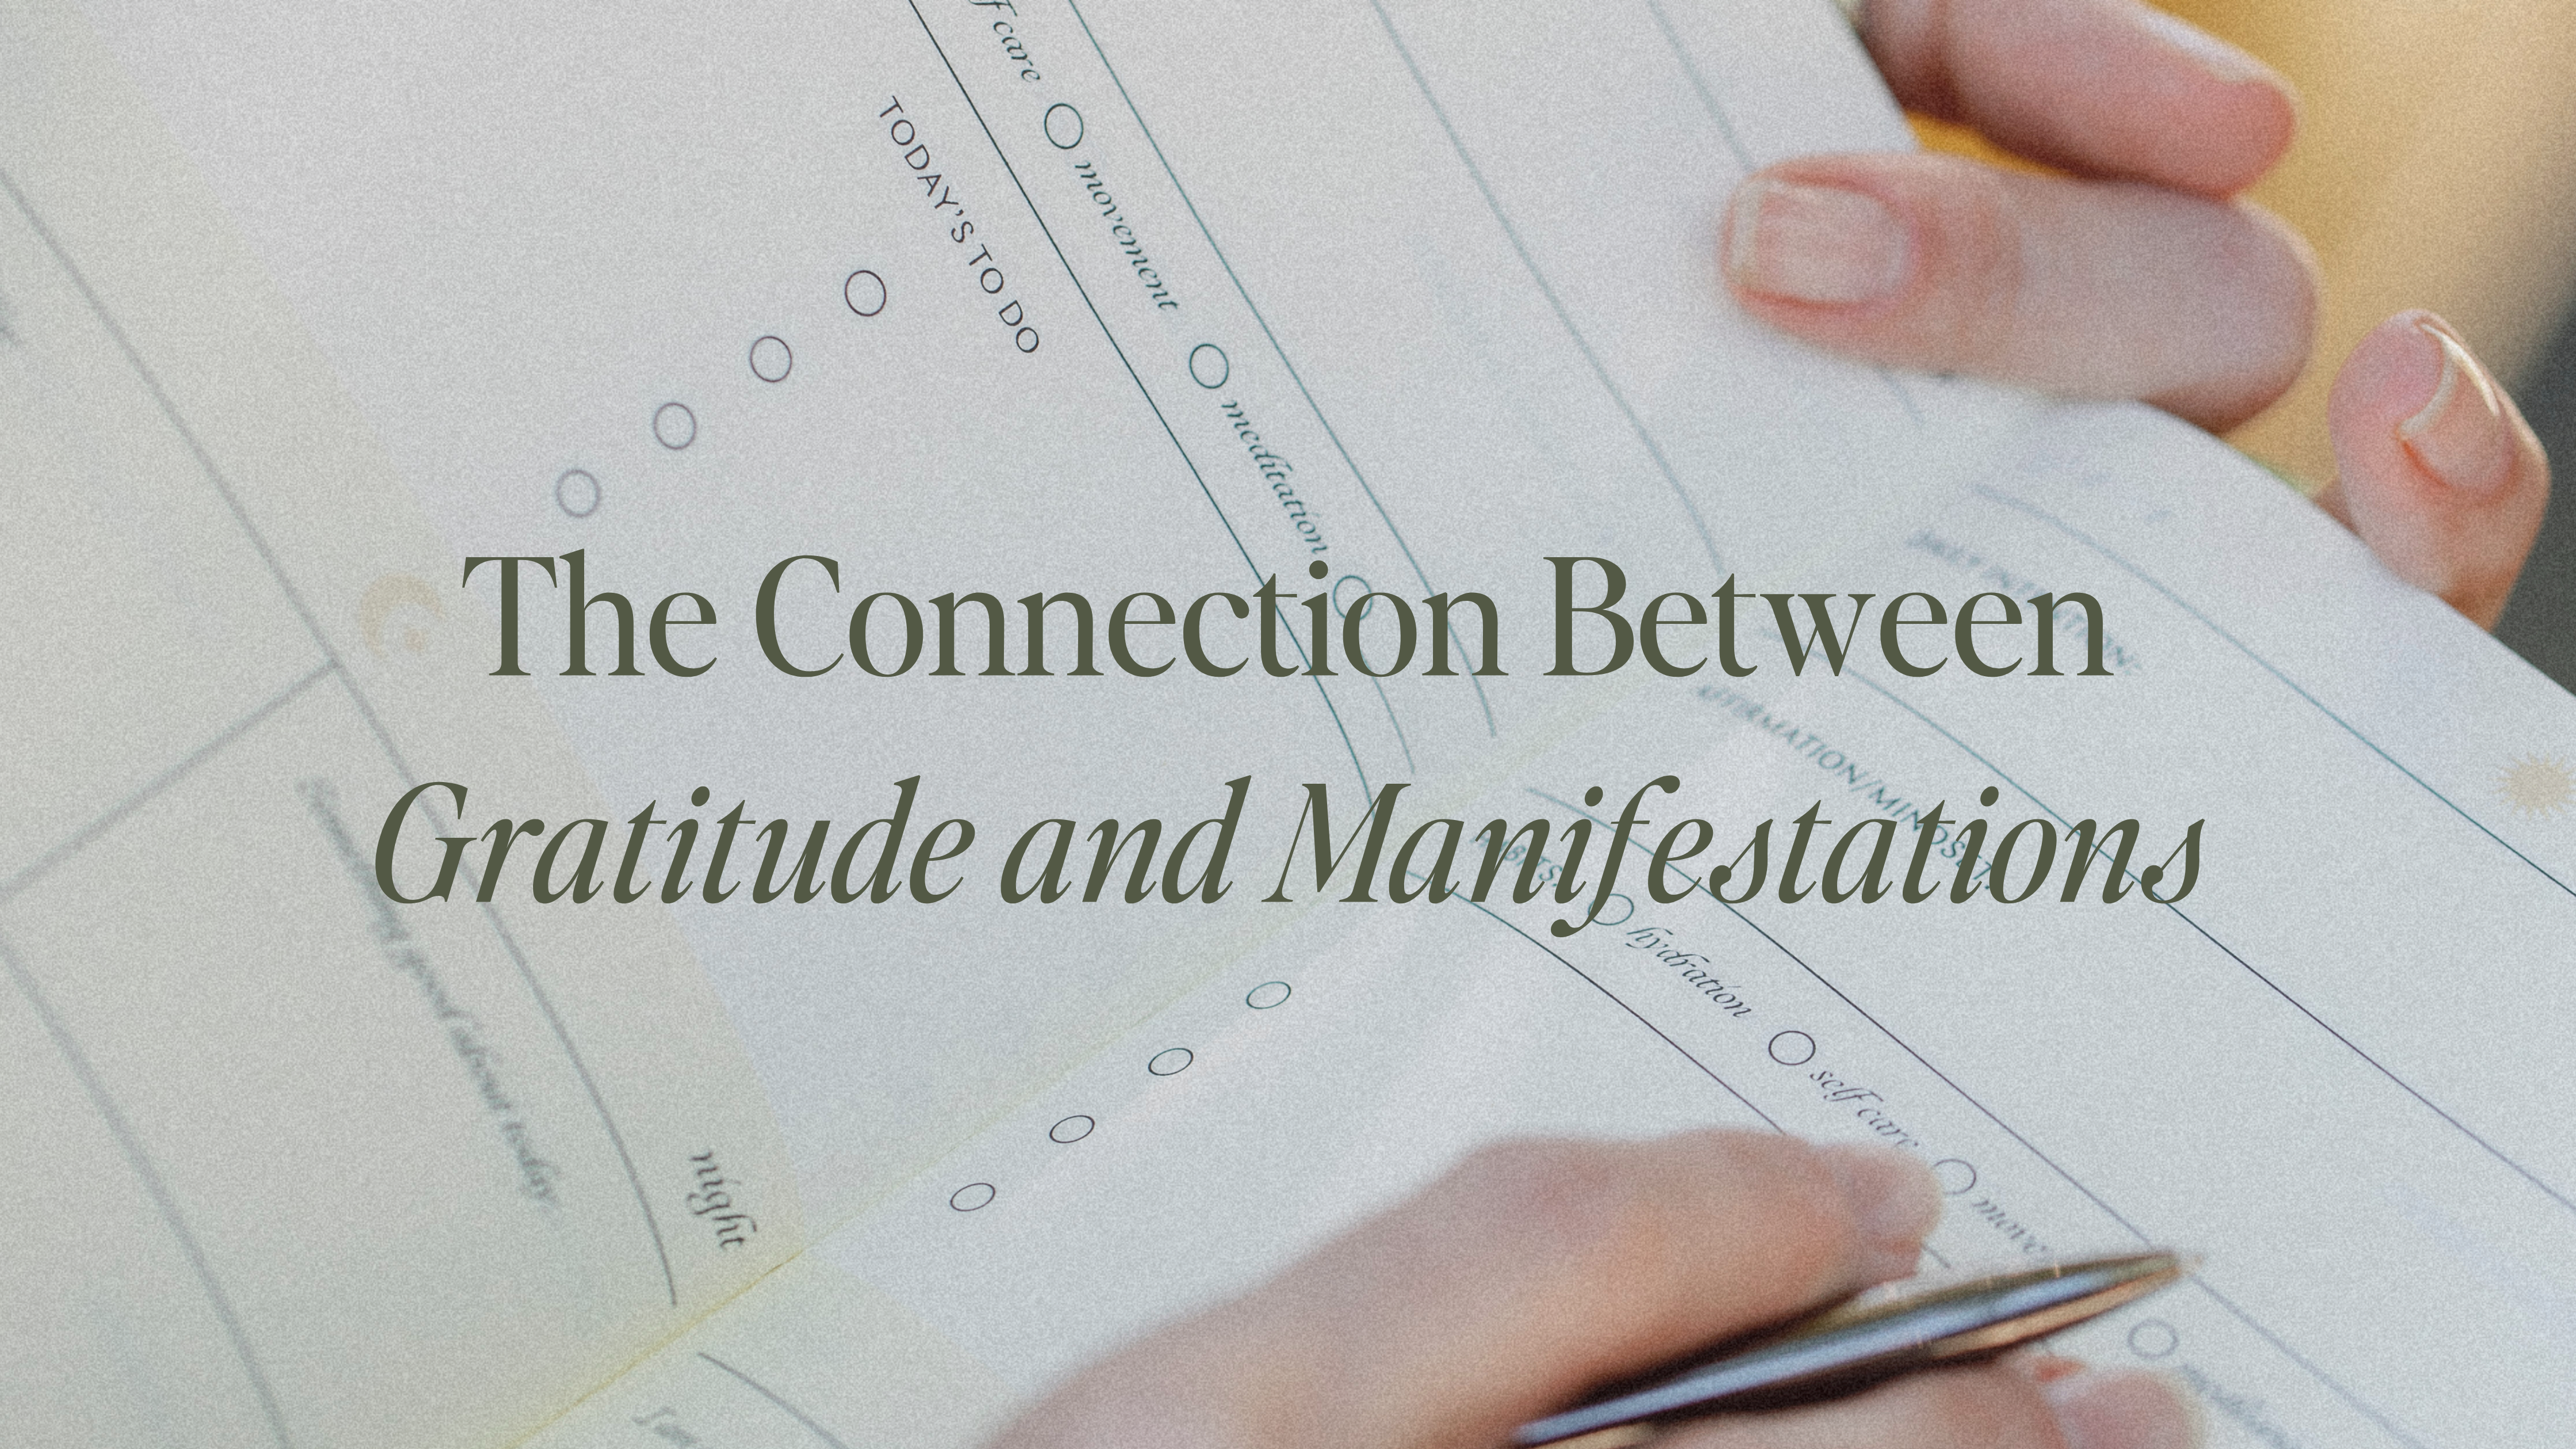 The Connection Between Gratitude and Manifestations